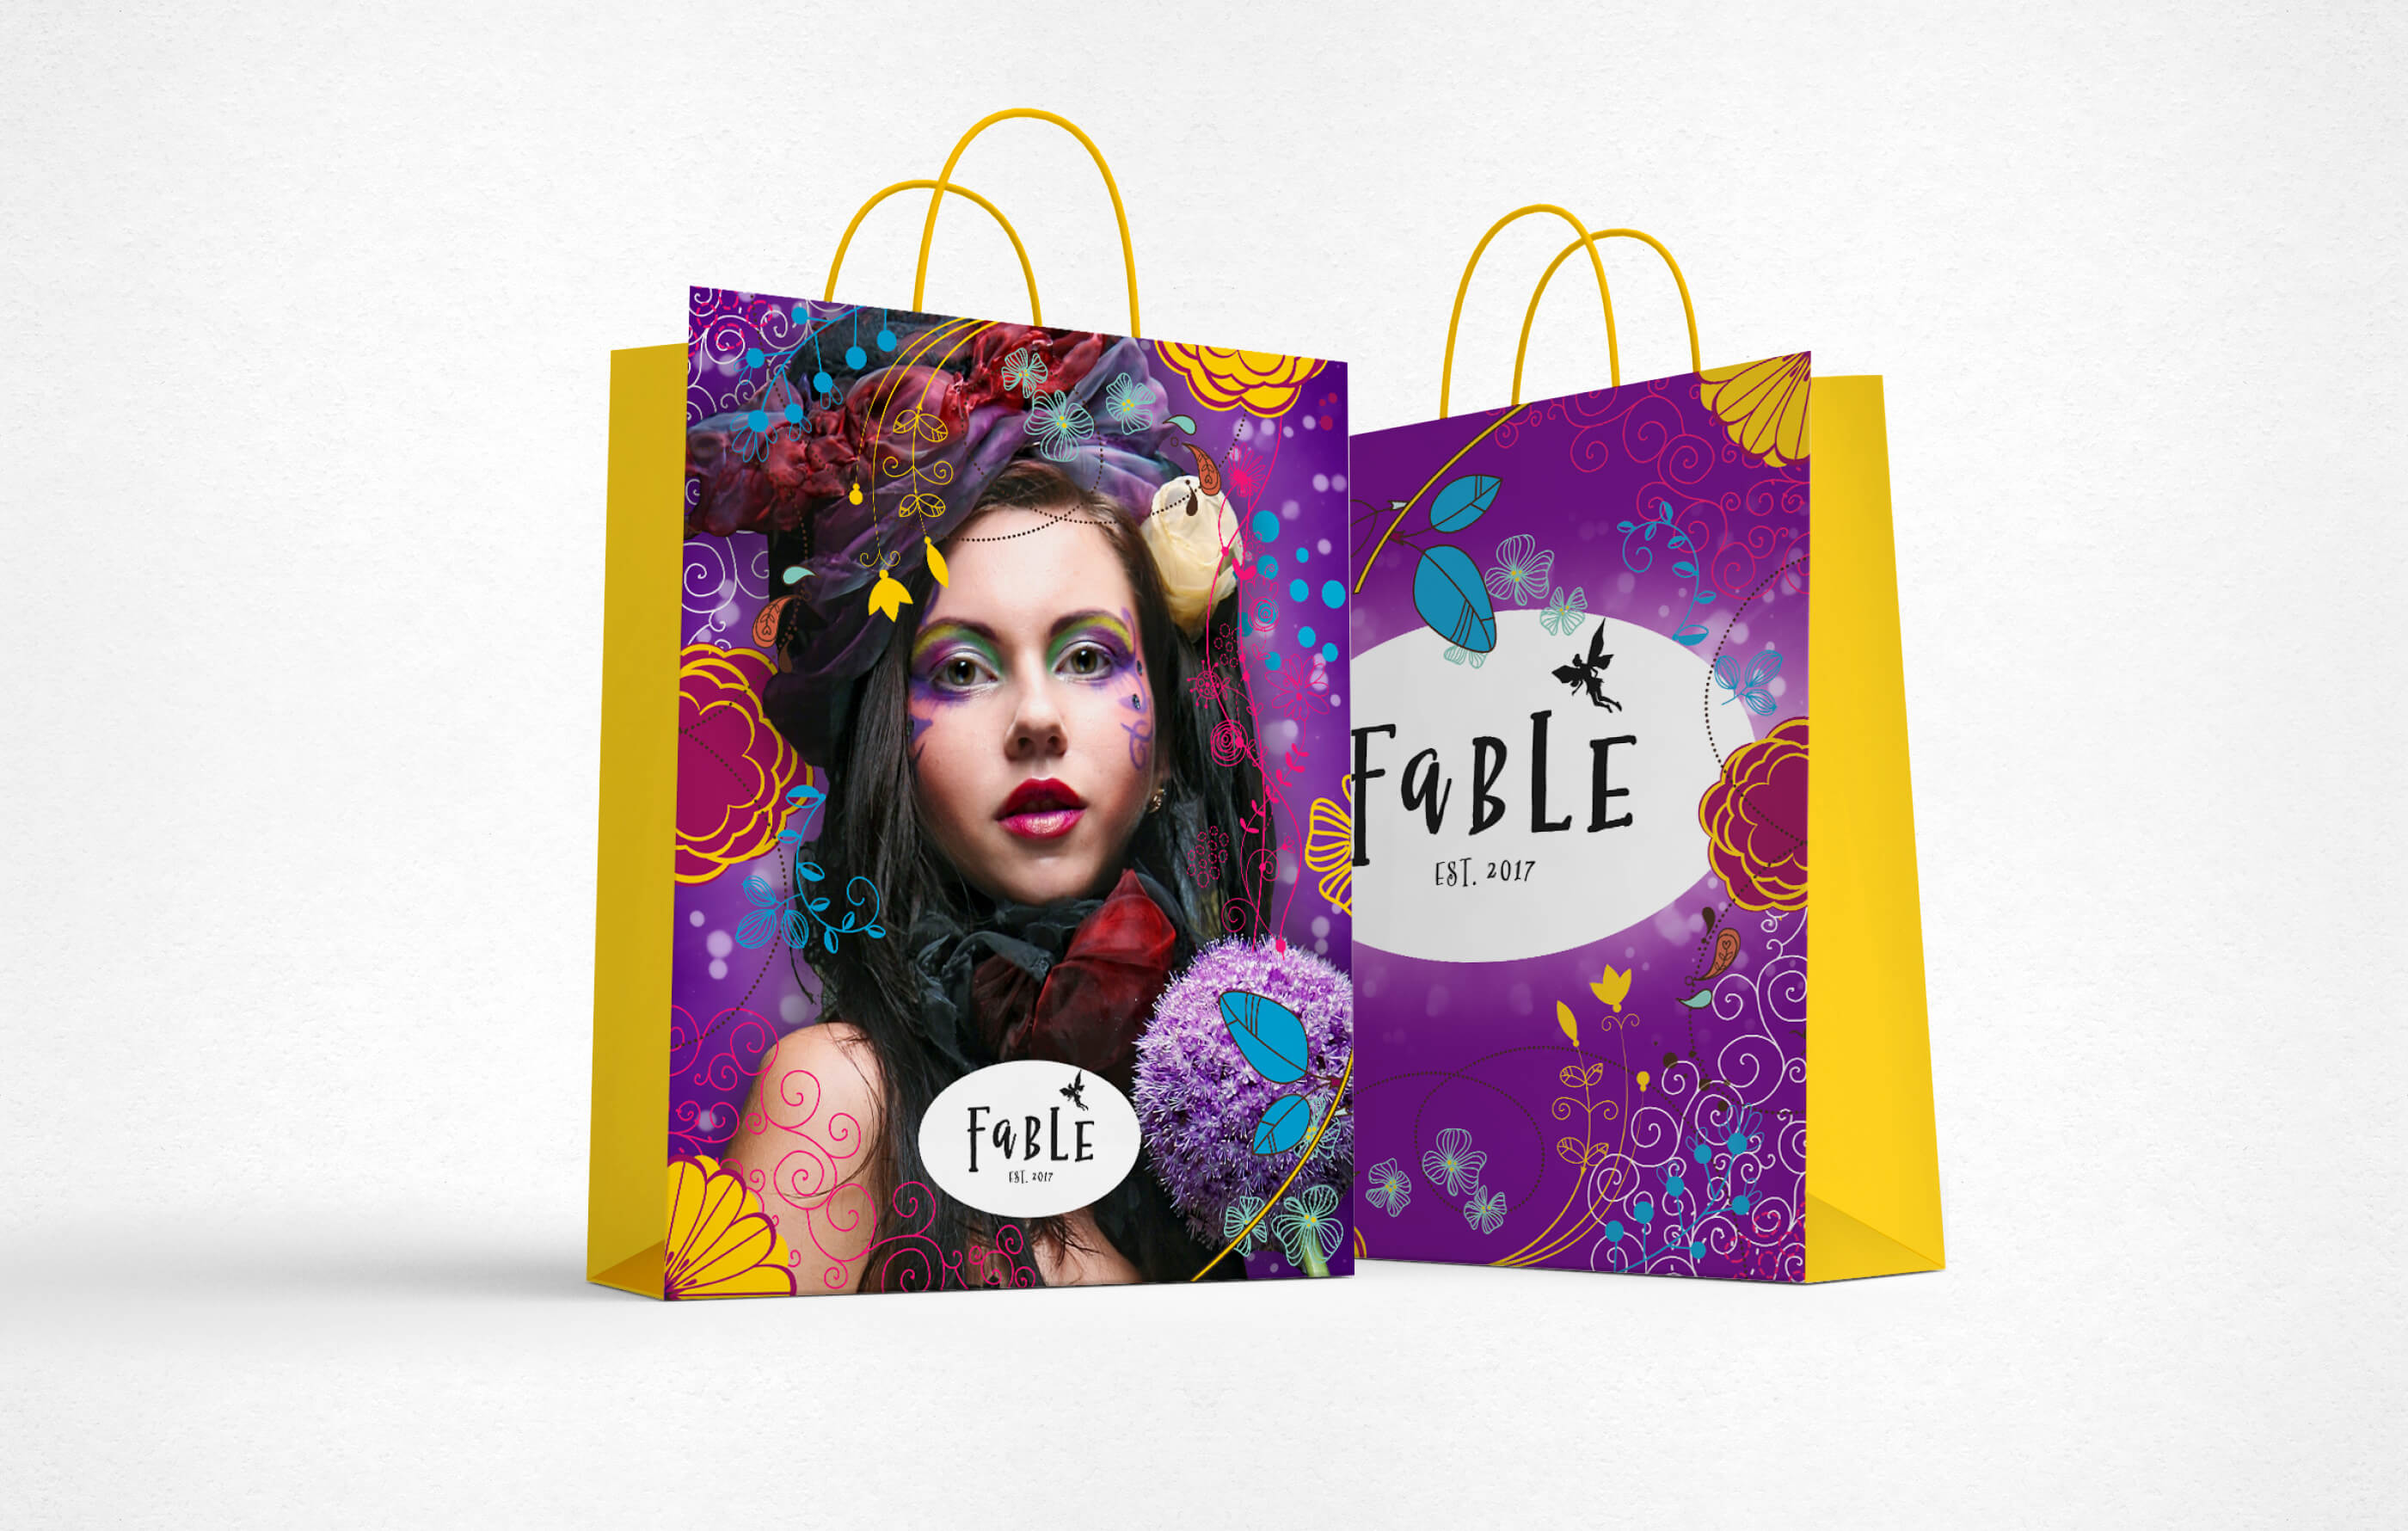 Paper shopping bag mock up, with illustrations on a purple background on the front and back and contrasting yellow sides